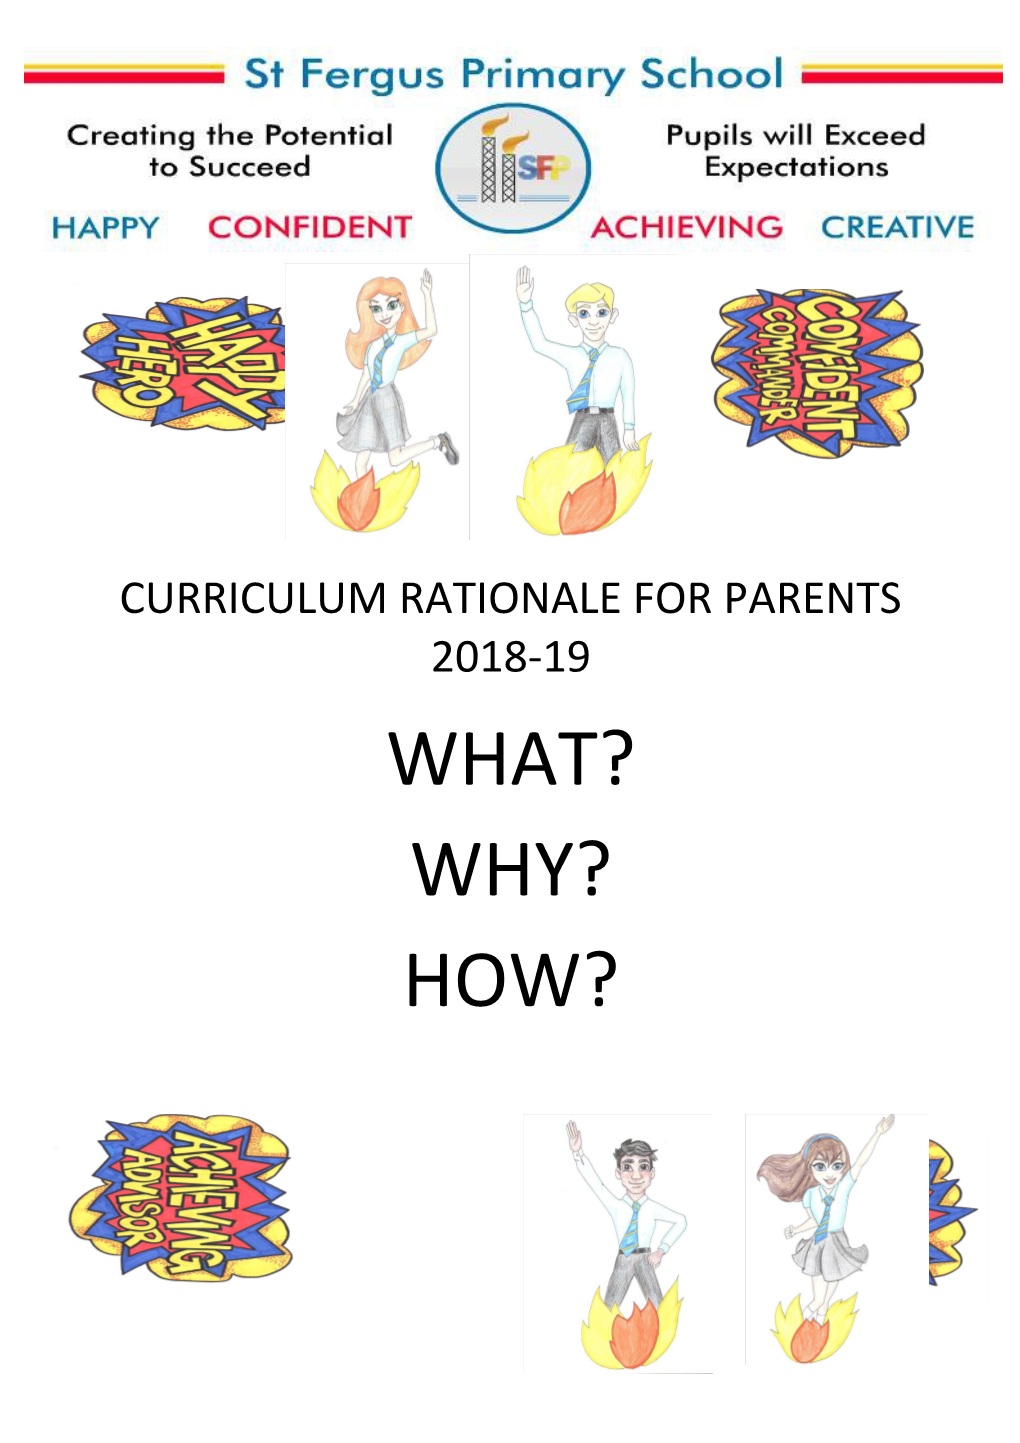 Curriculum Rationale for Parents 2018-19